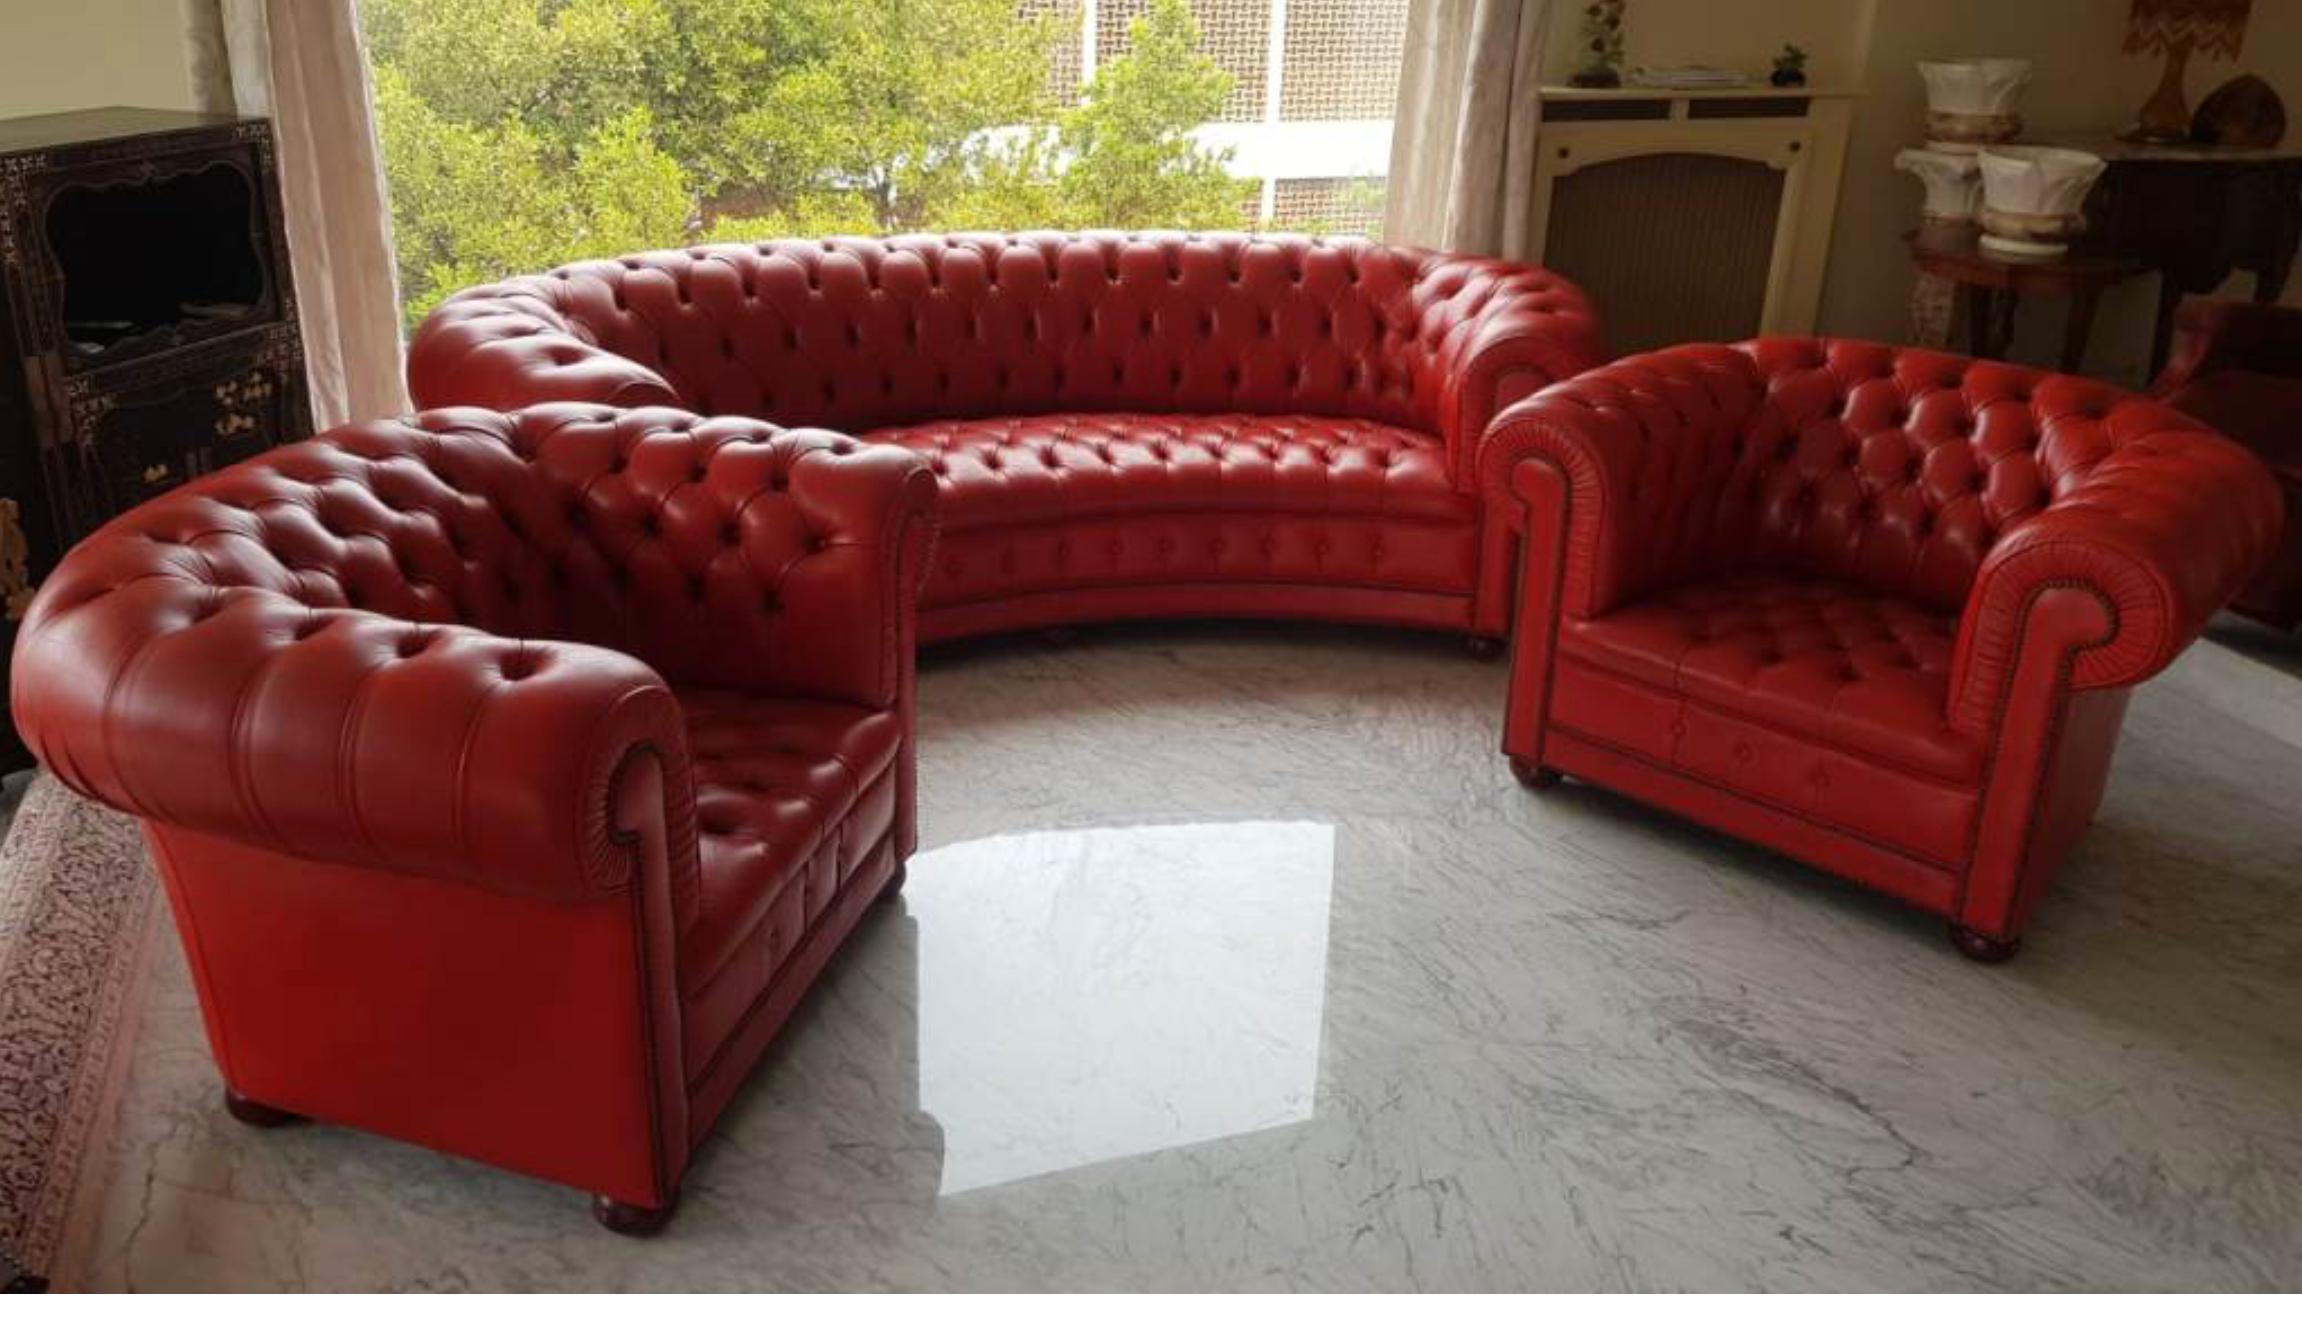 Chesterfield red leather set of oval shaped sofa and two club armchairs.
Very good condition.
England, circa 1970.